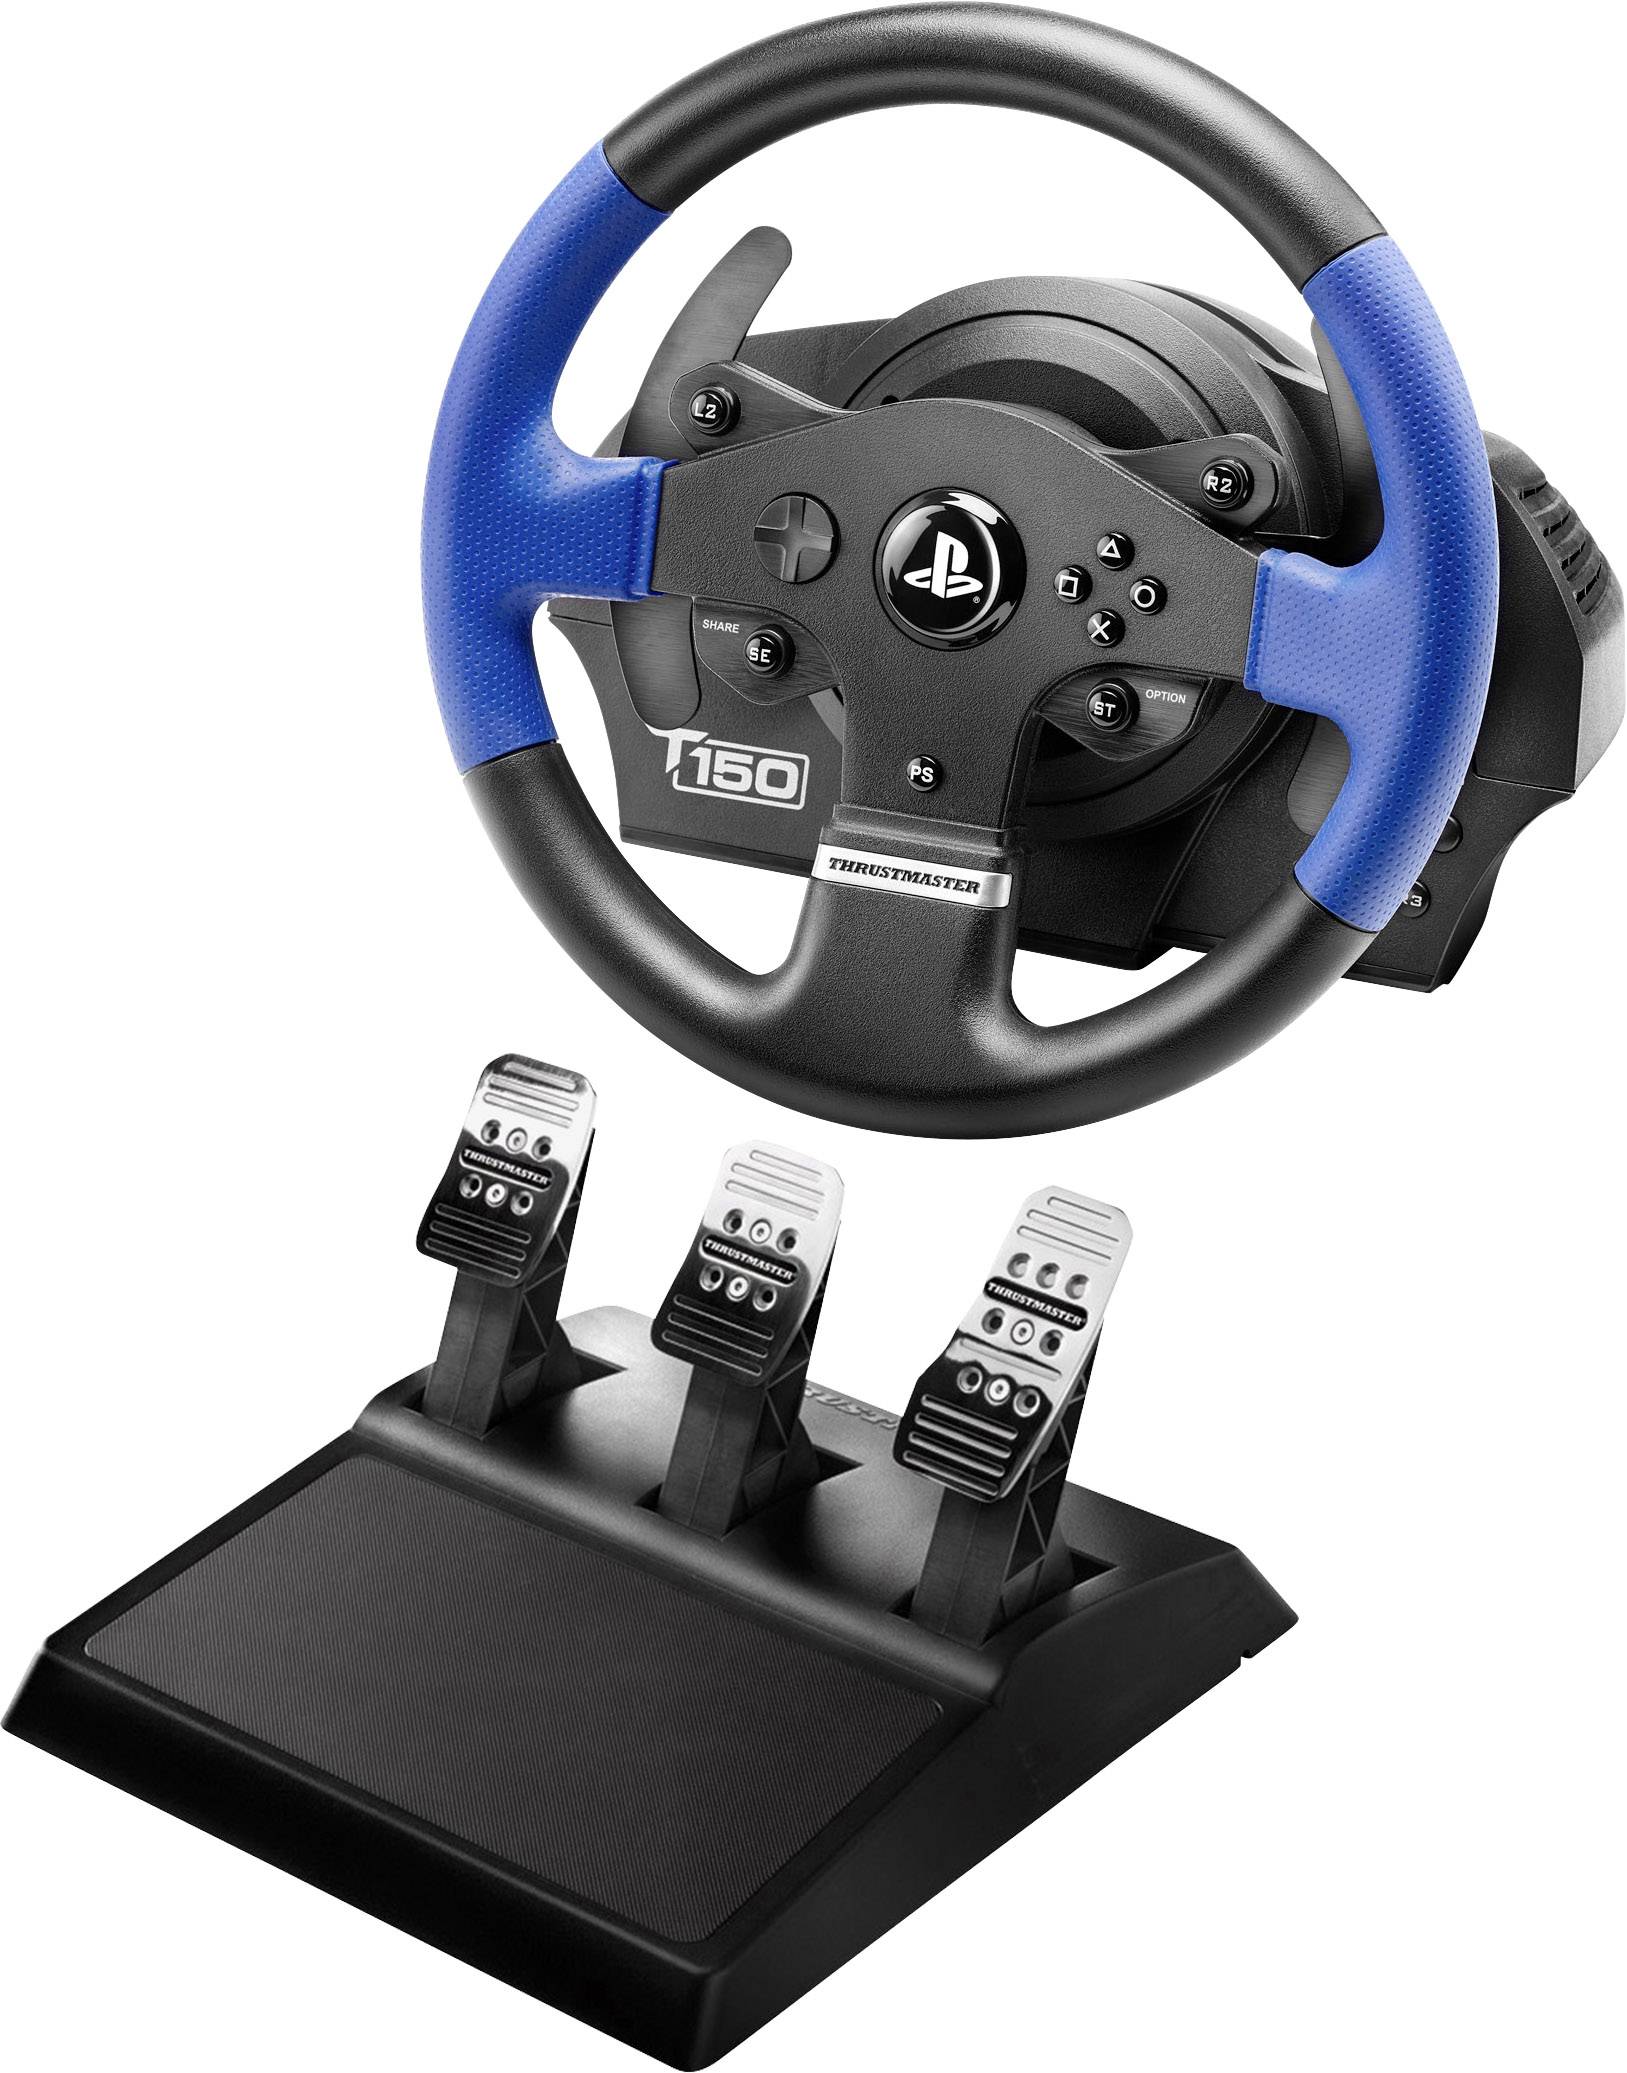 breed snap trainer Thrustmaster T150 Pro Force Feedback + T3PA Steering wheel USB 2.0  PlayStation 3, PlayStation 4, PC Black, Blue incl. fo | Conrad.com